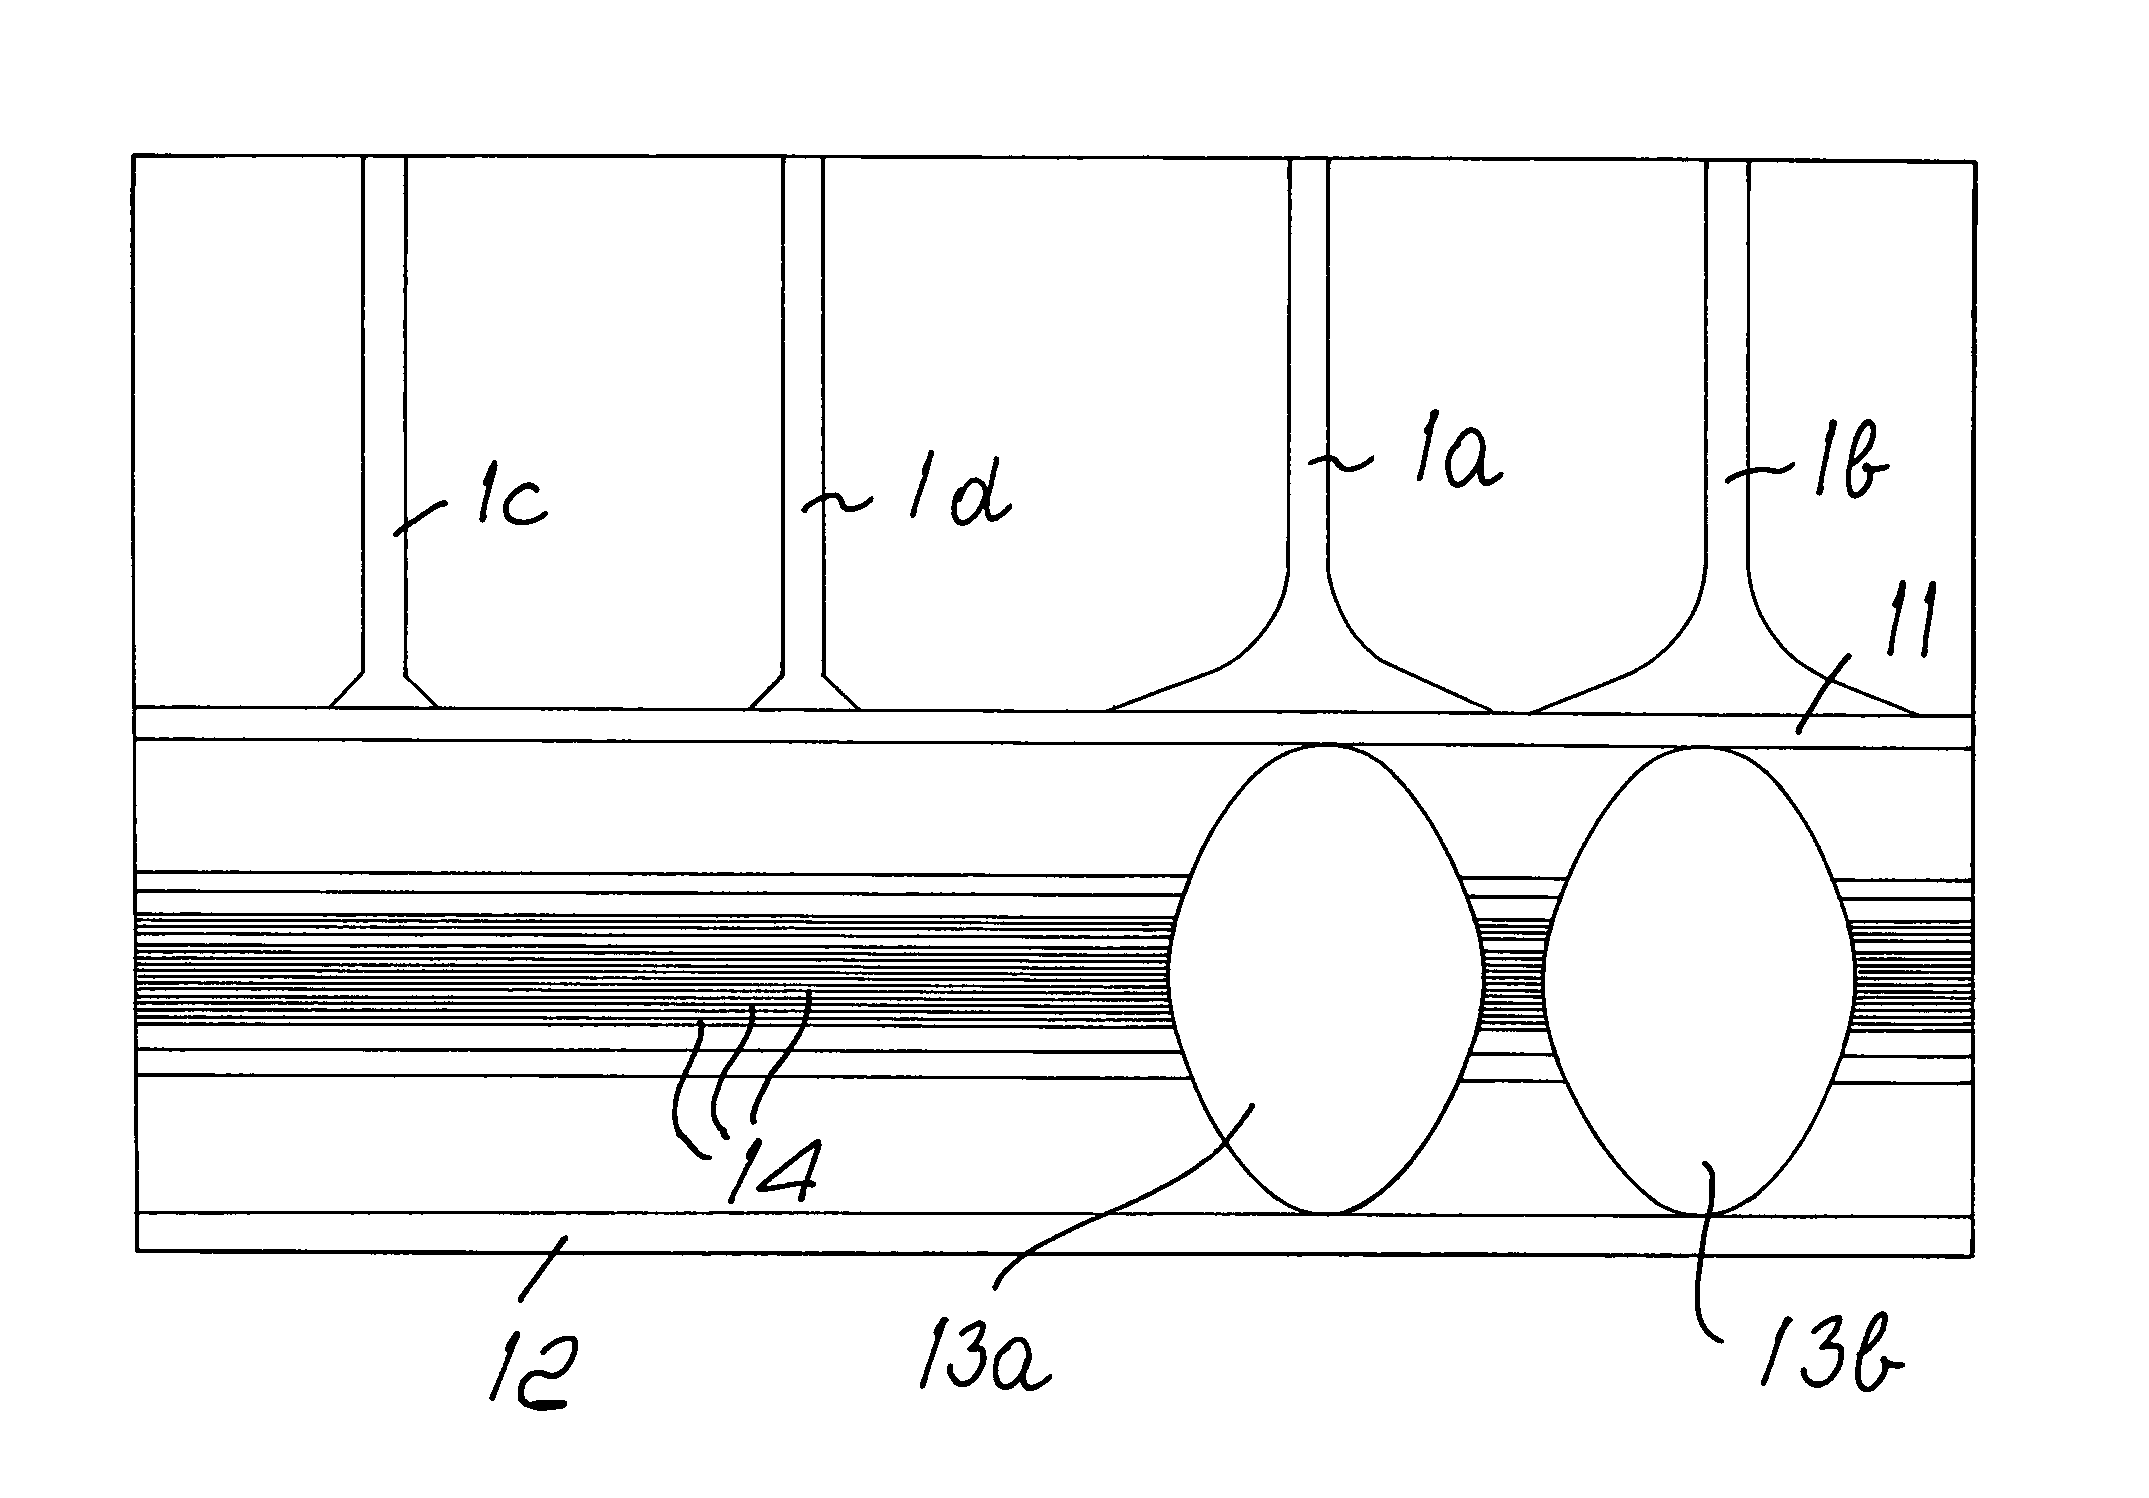 Method for manufacturing knitted articles with a circular knitting machine for forming items of clothing without lateral seams